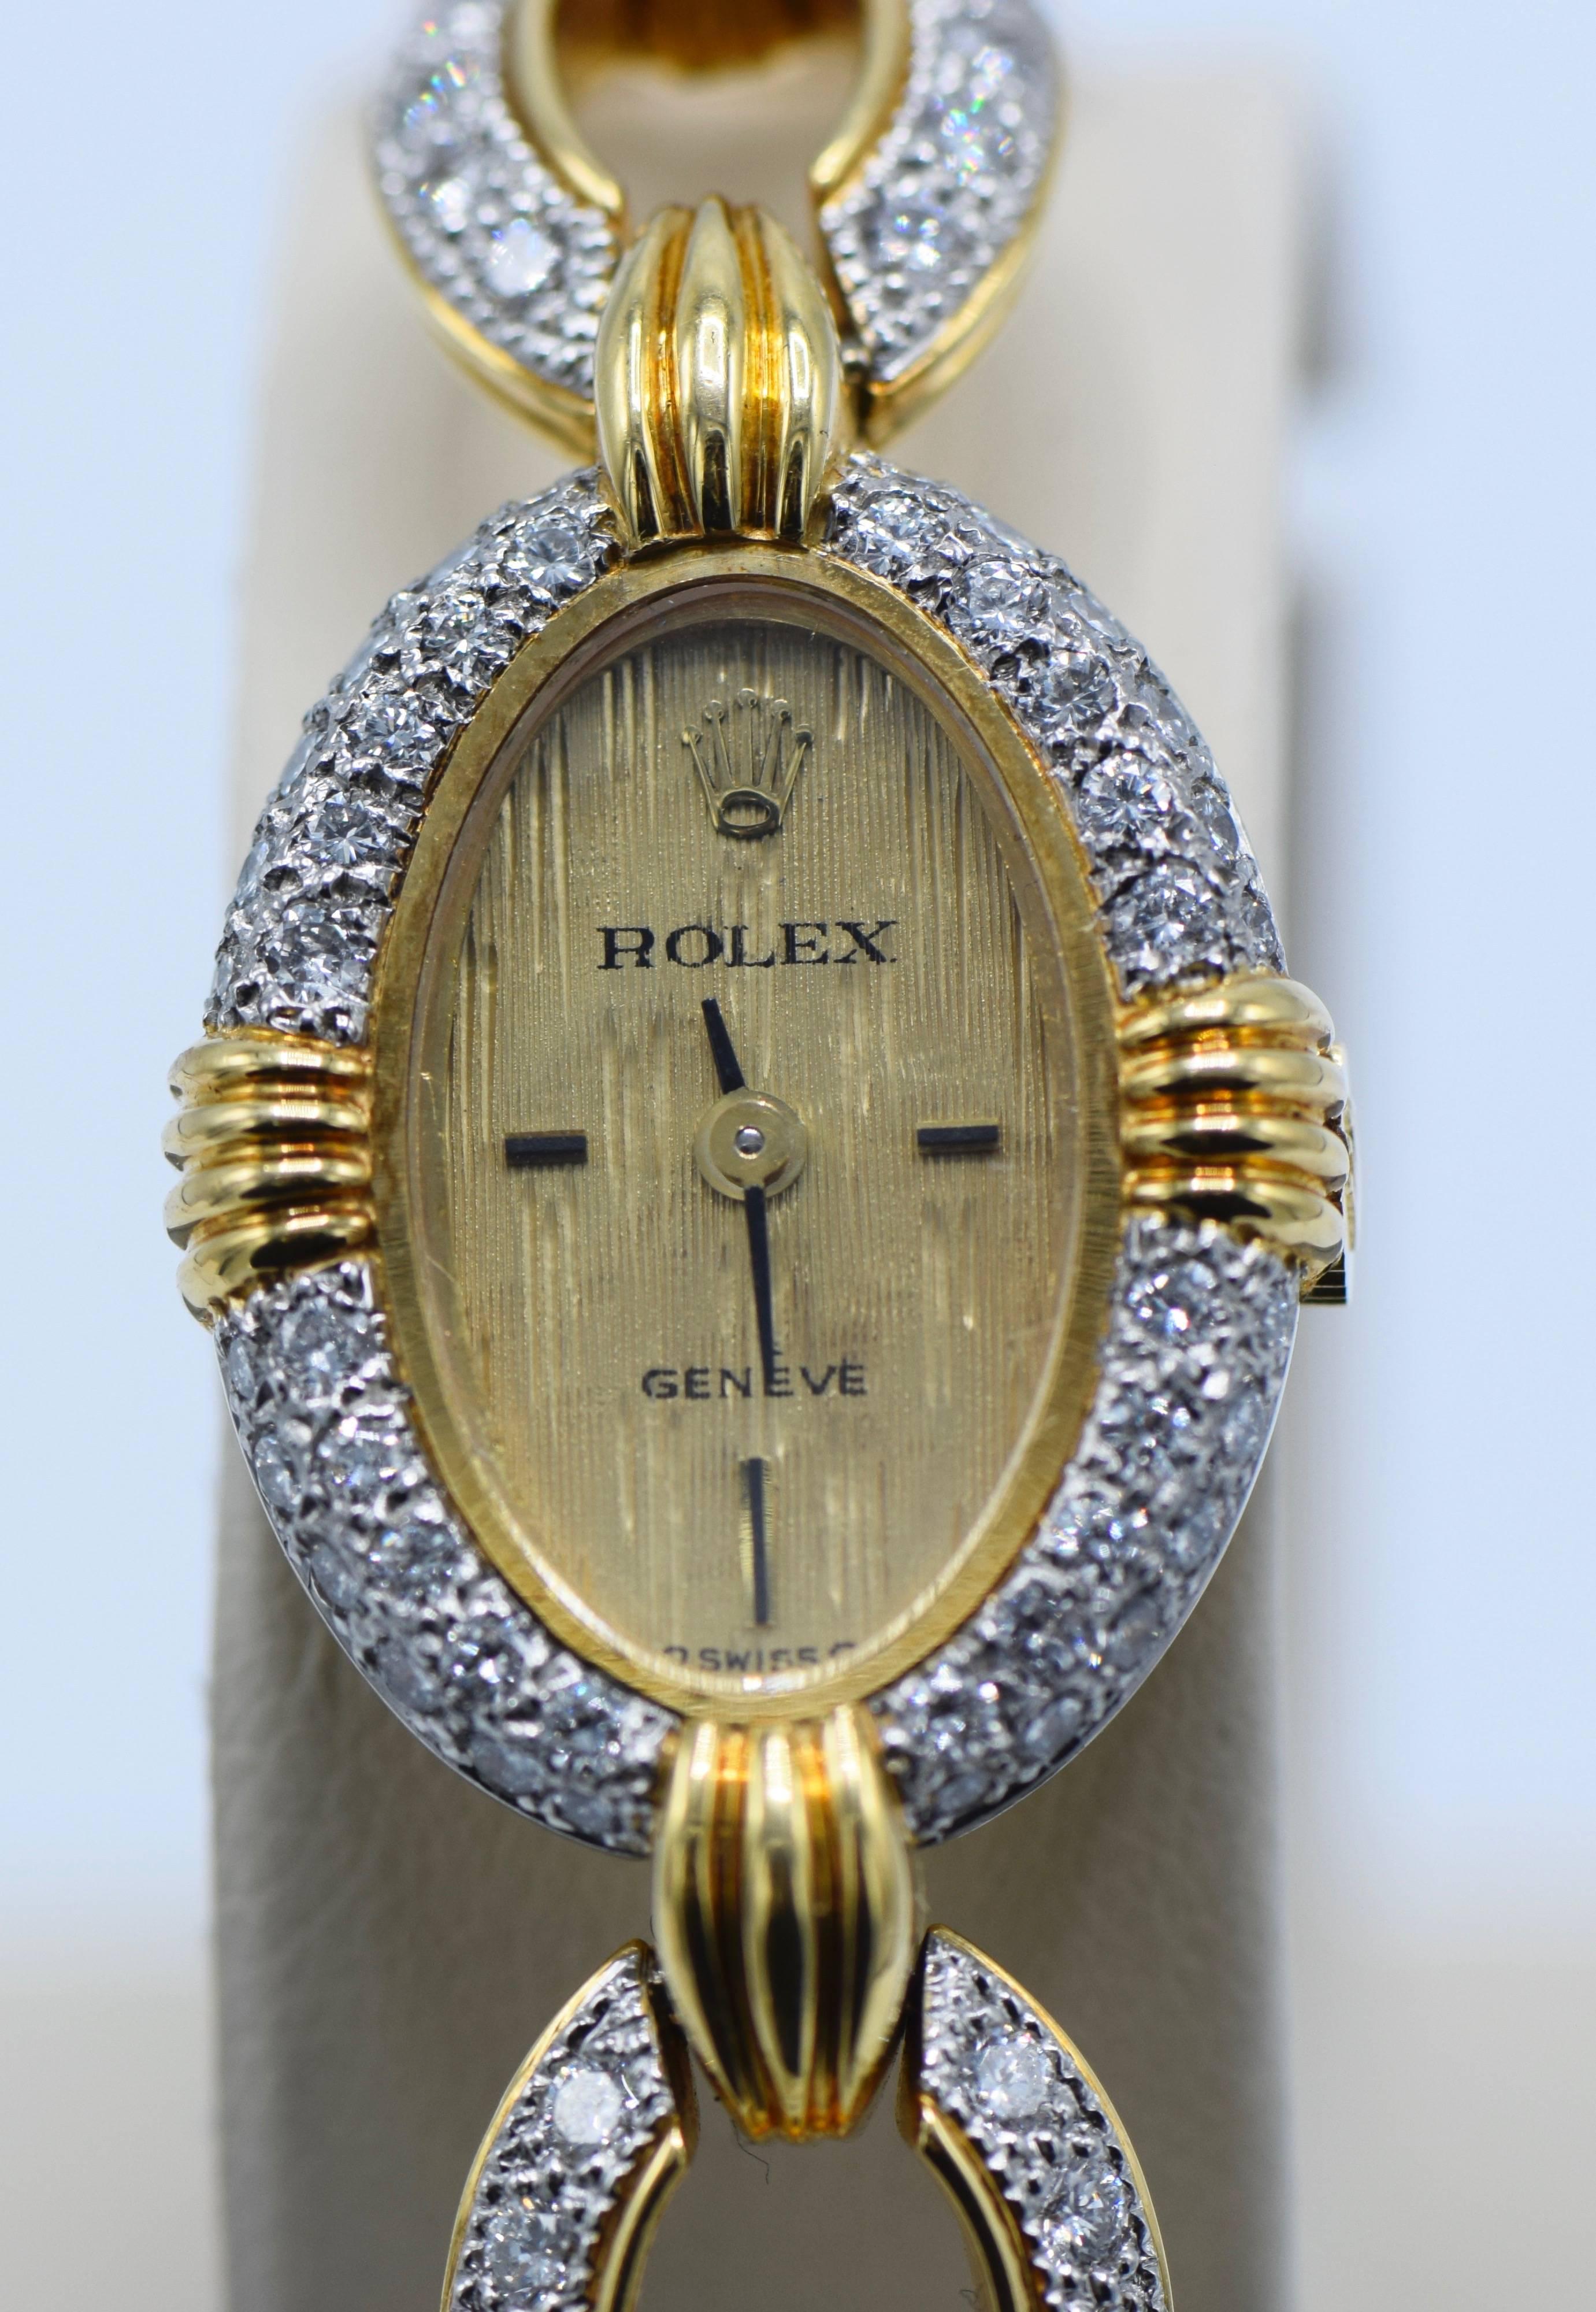 18 kt., mechanical, dia. ap. 22.5 x 19.0 mm., 144 round diamonds ap. 3.65 cts., dial & movement signed Rolex, Geneve, Swiss, case no. 370216, with maker's marks, ap. 44 dwts. gross.

Color: G-H

Clarity: VS. 

Case diameter 7/8 x 11/16 inch.